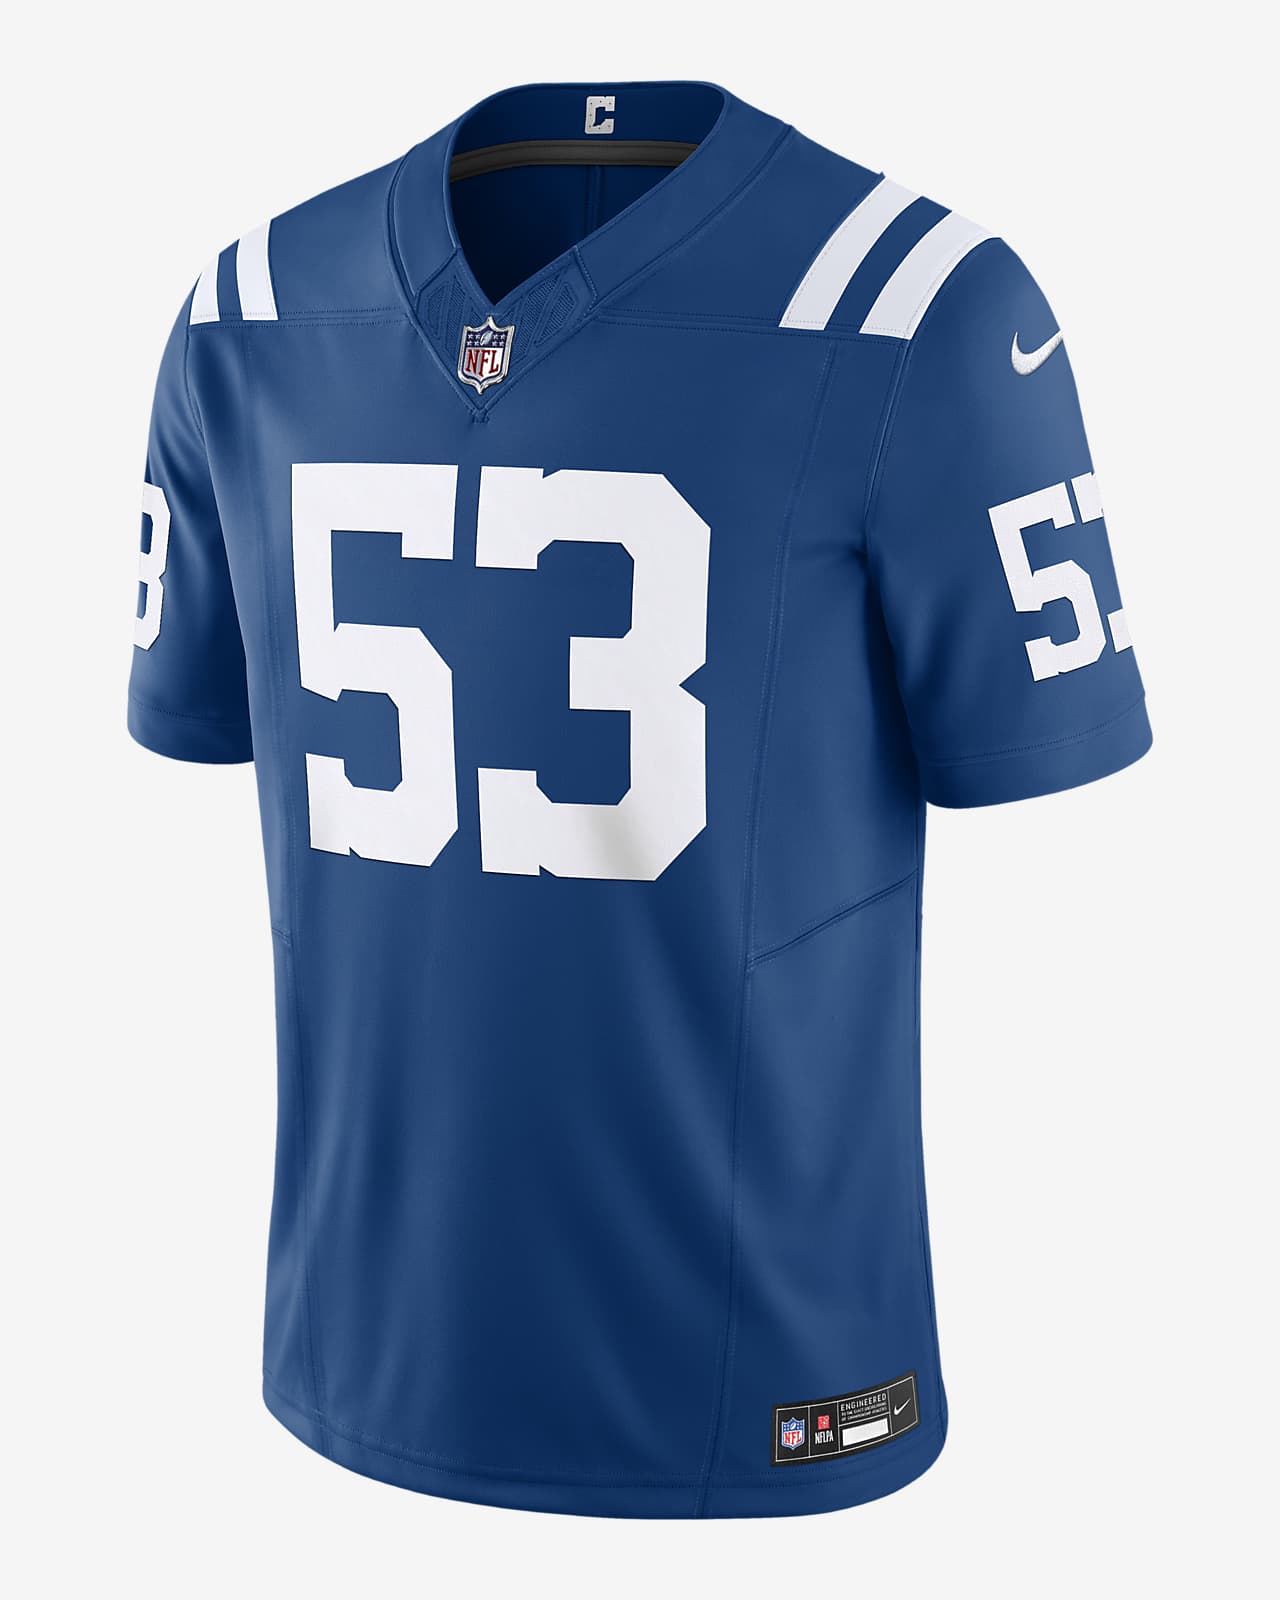 Shaquille Leonard Indianapolis Colts Men's Nike Dri-FIT NFL Limited Football Jersey